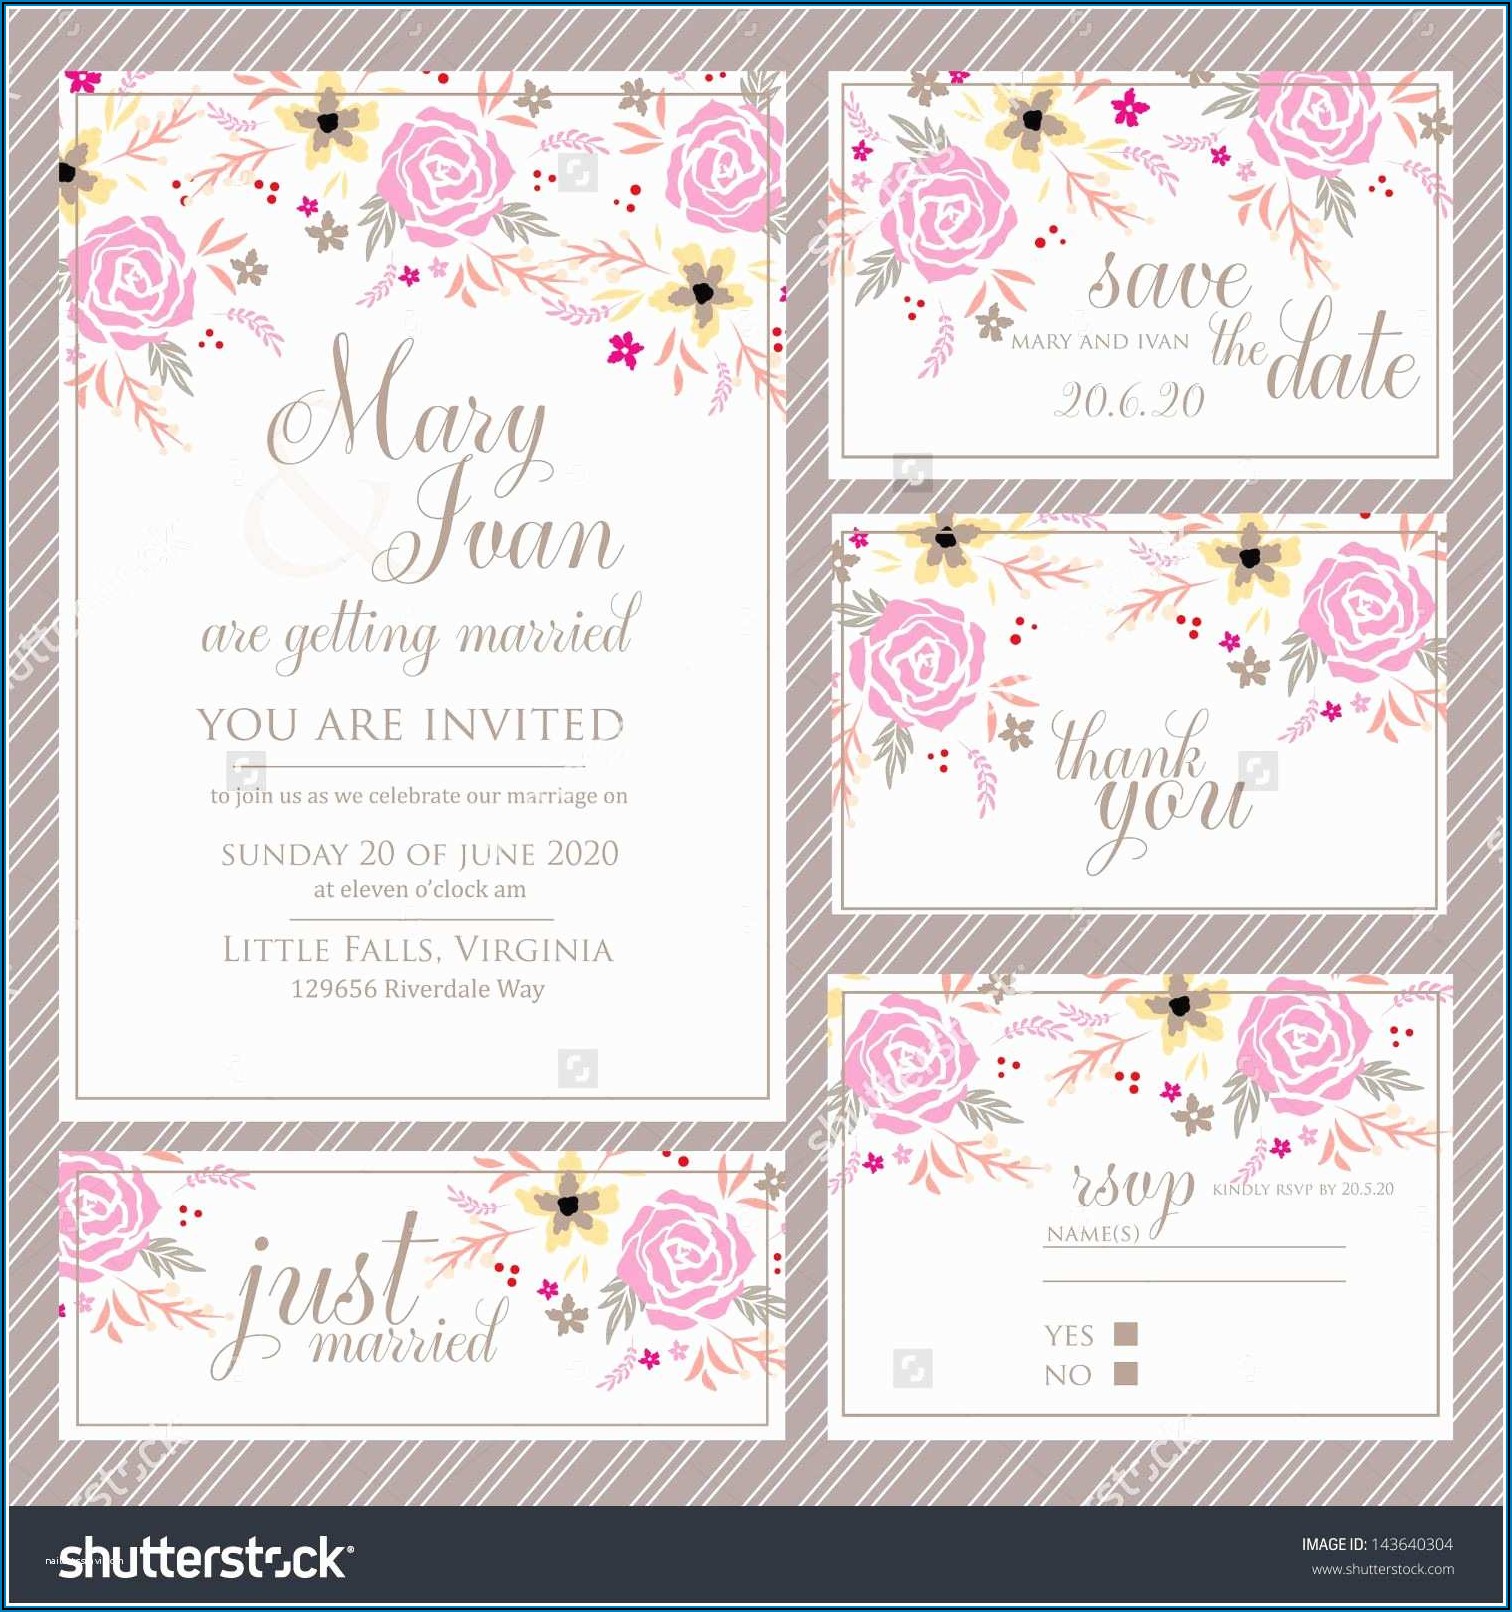 Wedding Invitations With Rsvp Cards Included Uk